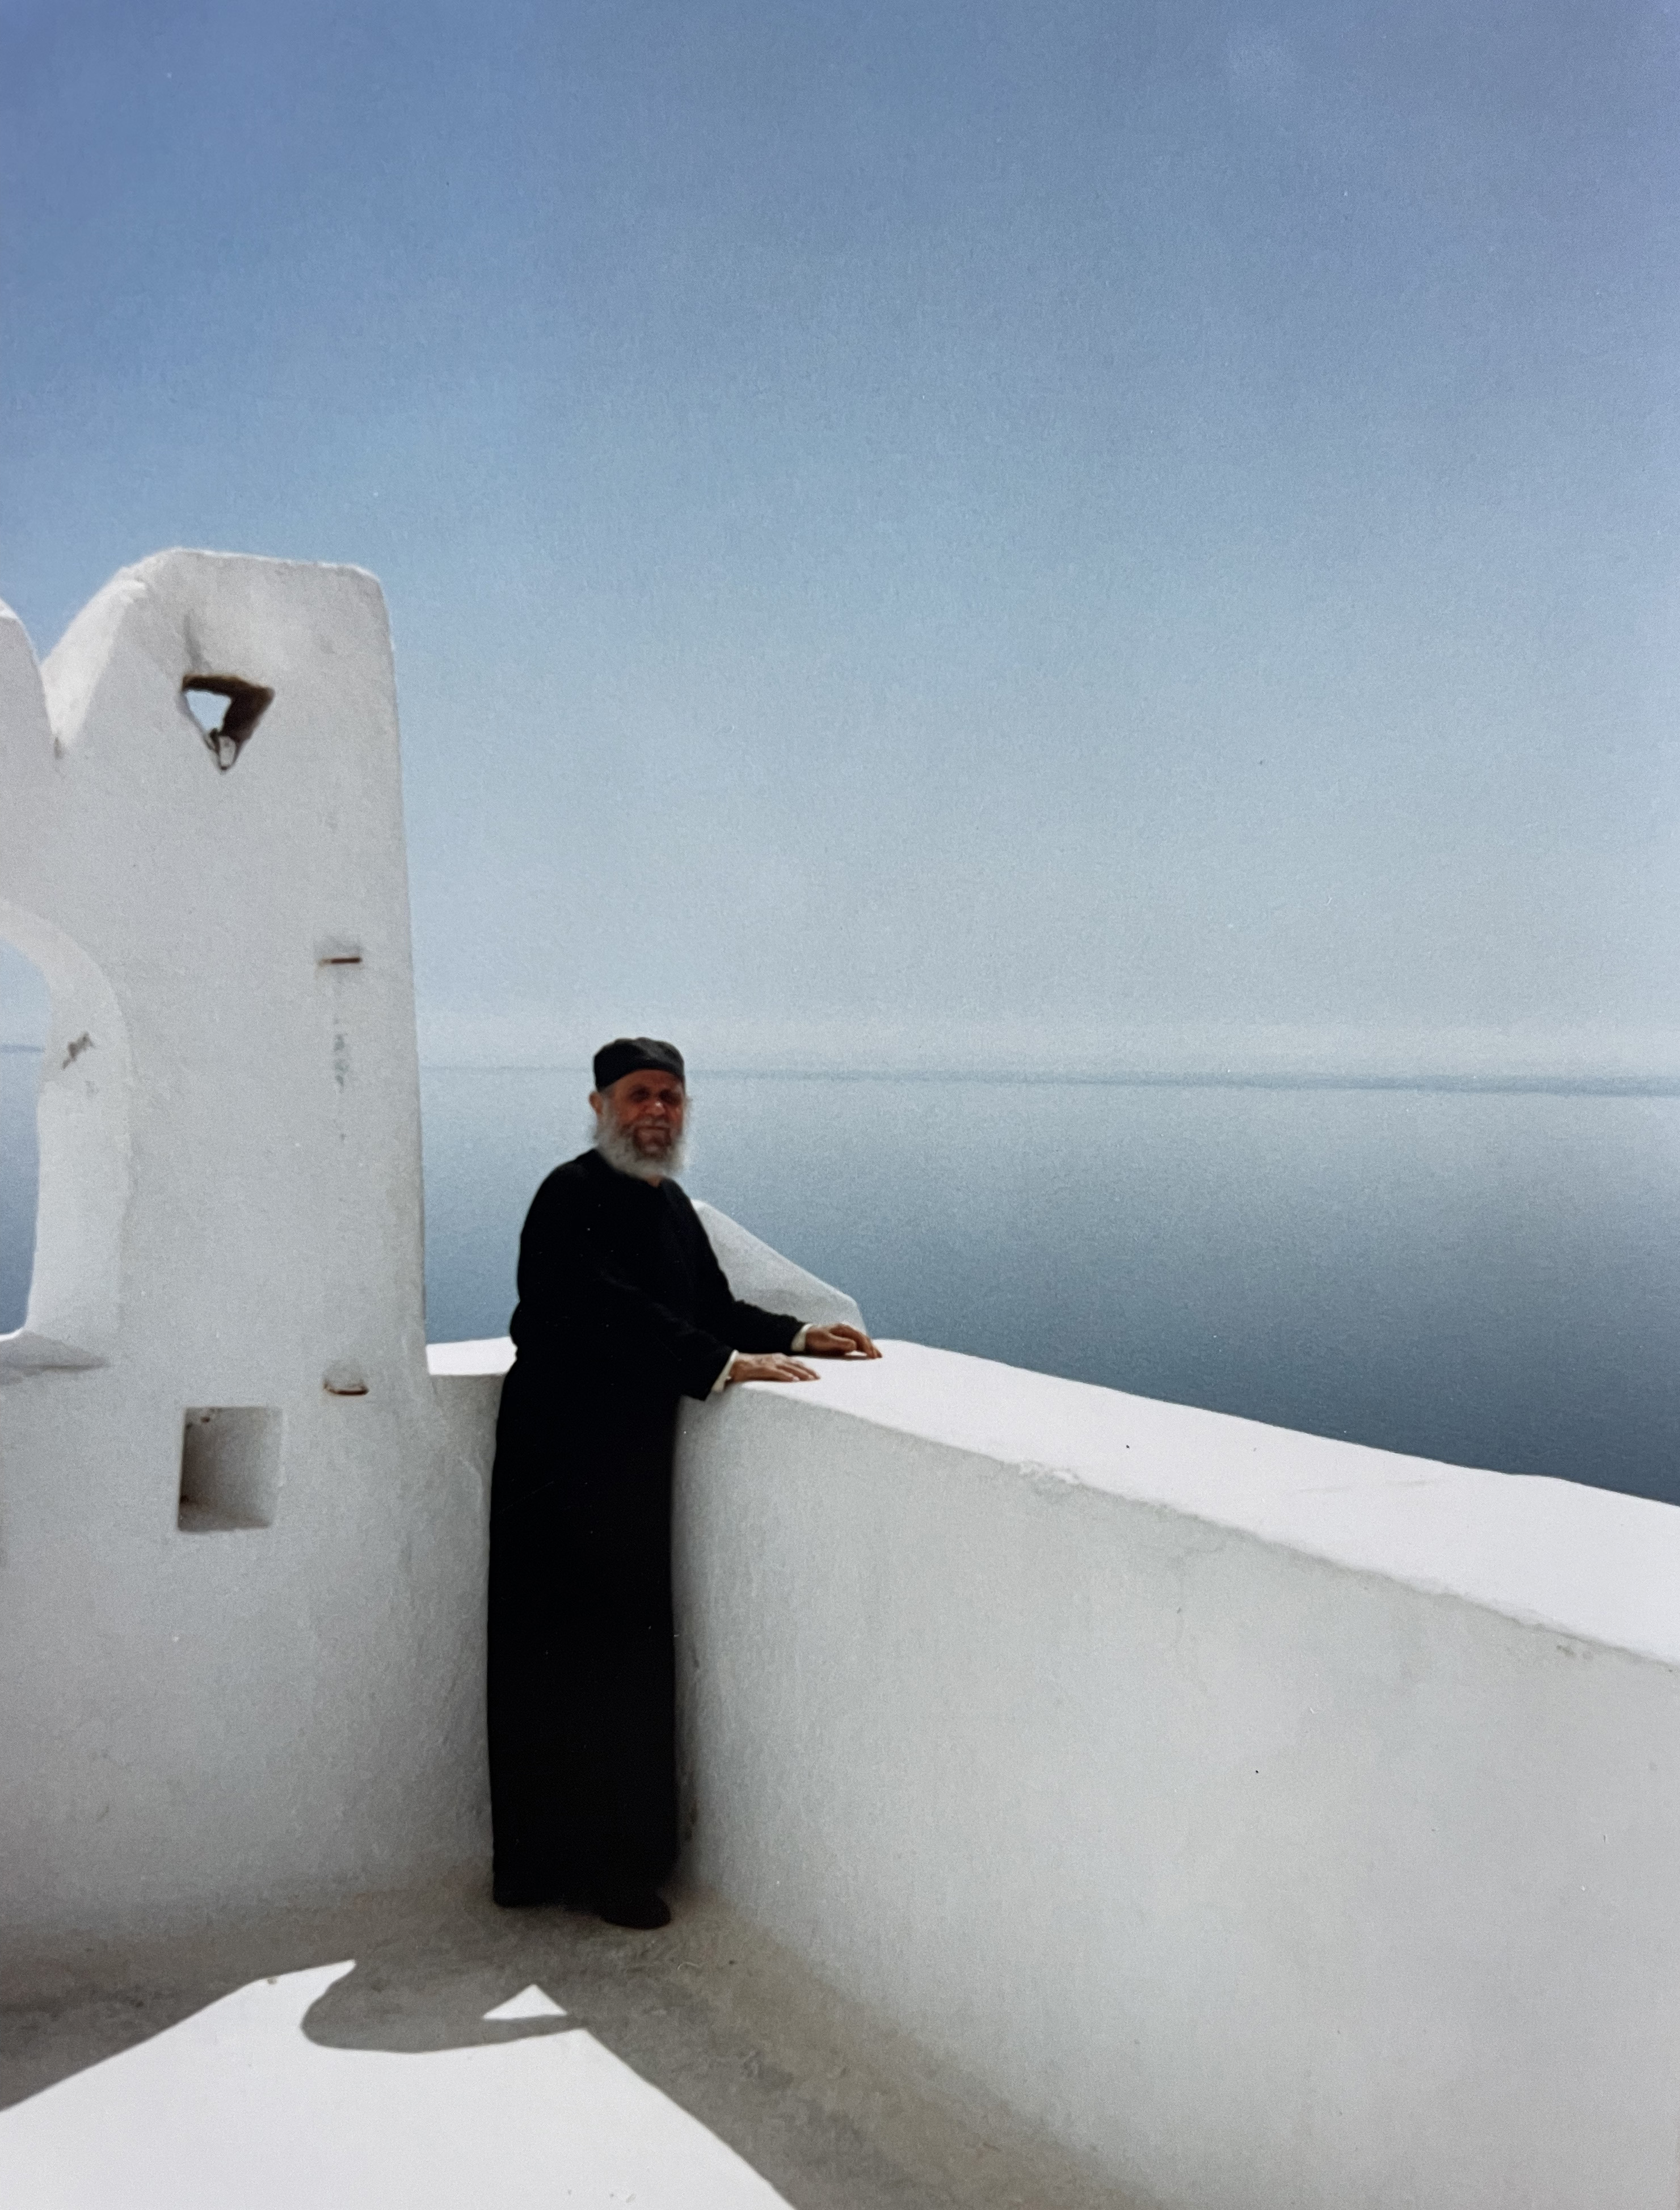 Images of the Monastery of the Panagia Hozoviotissa on the isand of Amorgos